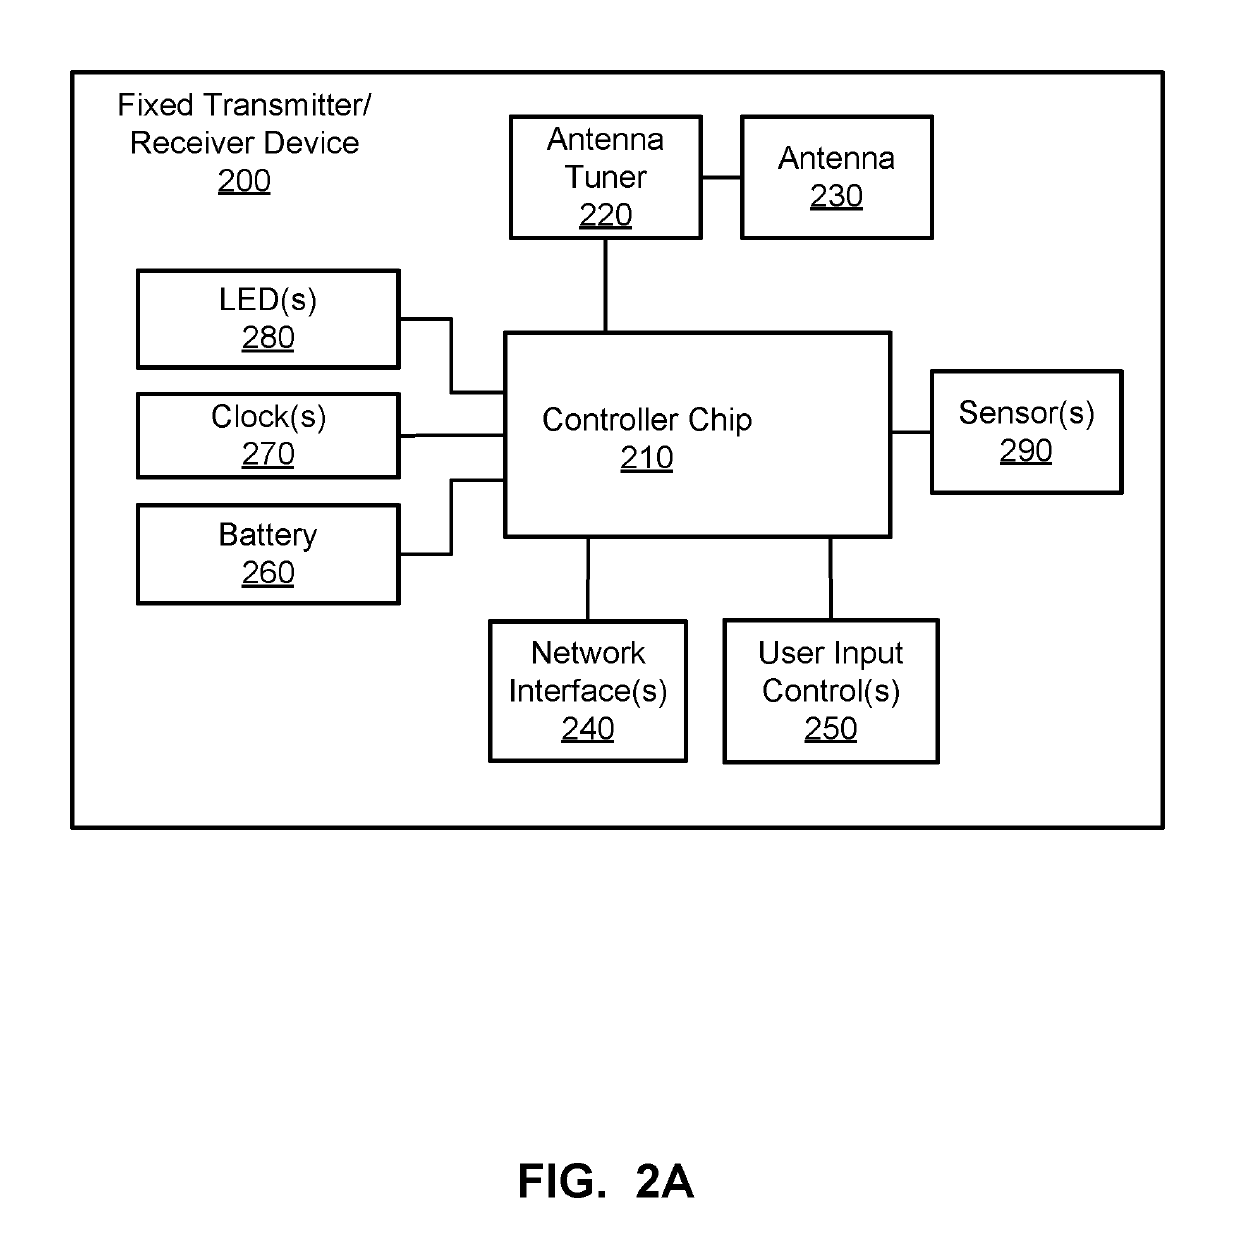 Healthcare asset tracker apparatus and methods